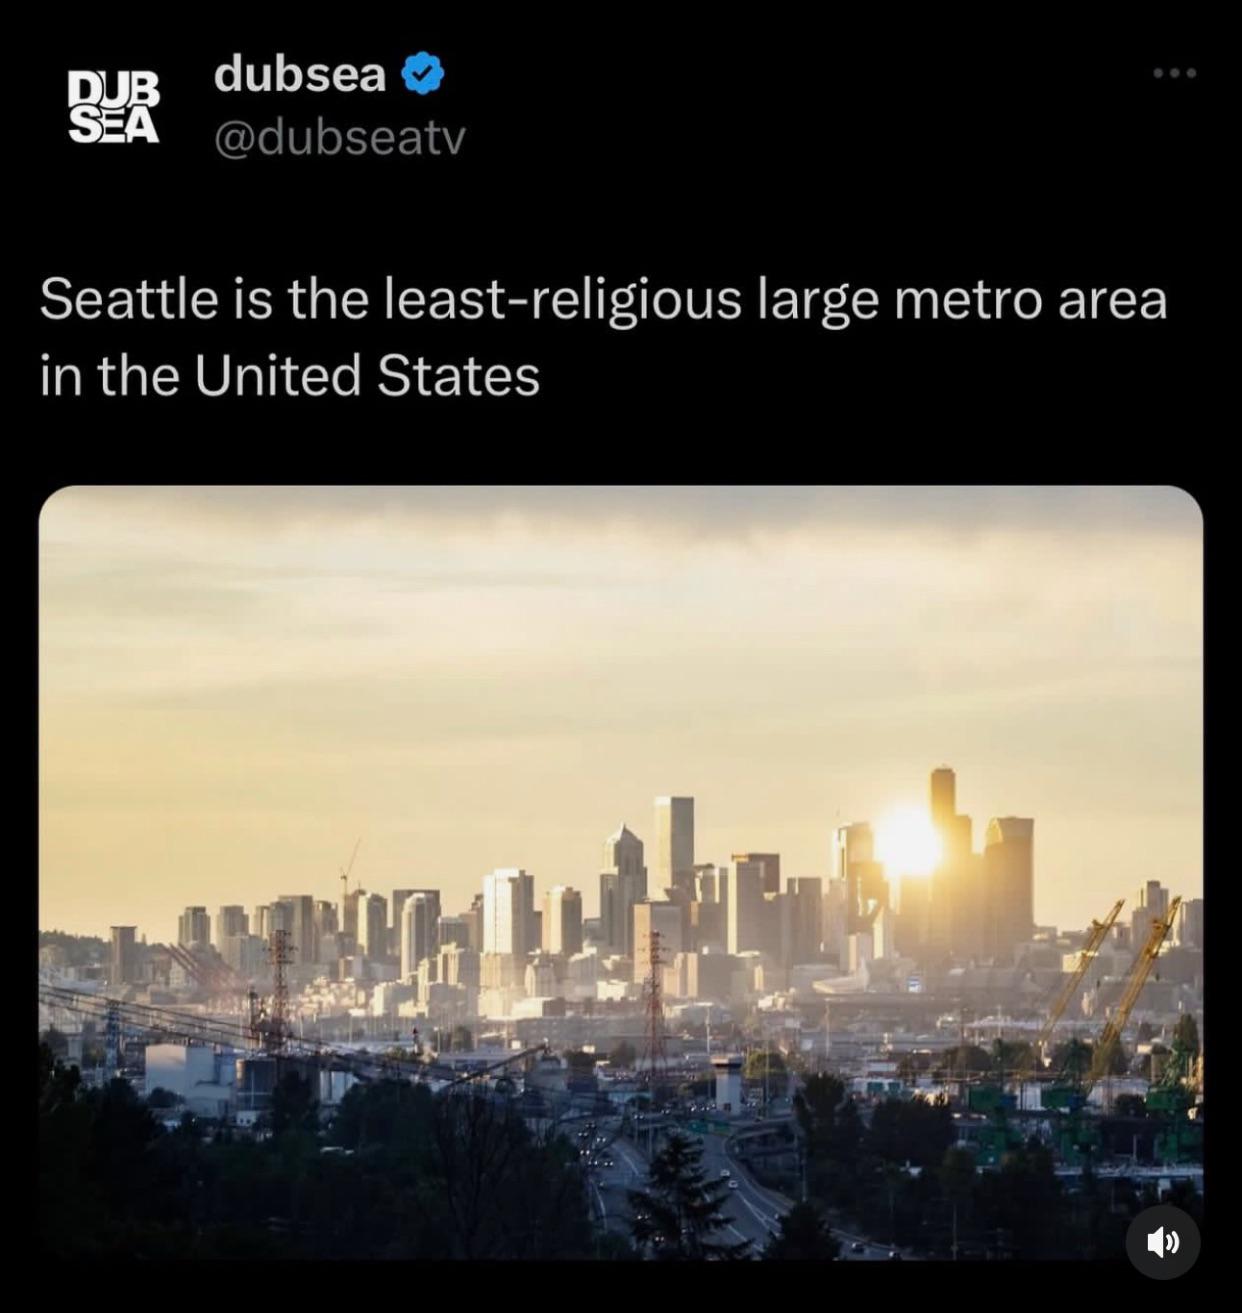 r/Washington - Seattle is the least religious big city in the country